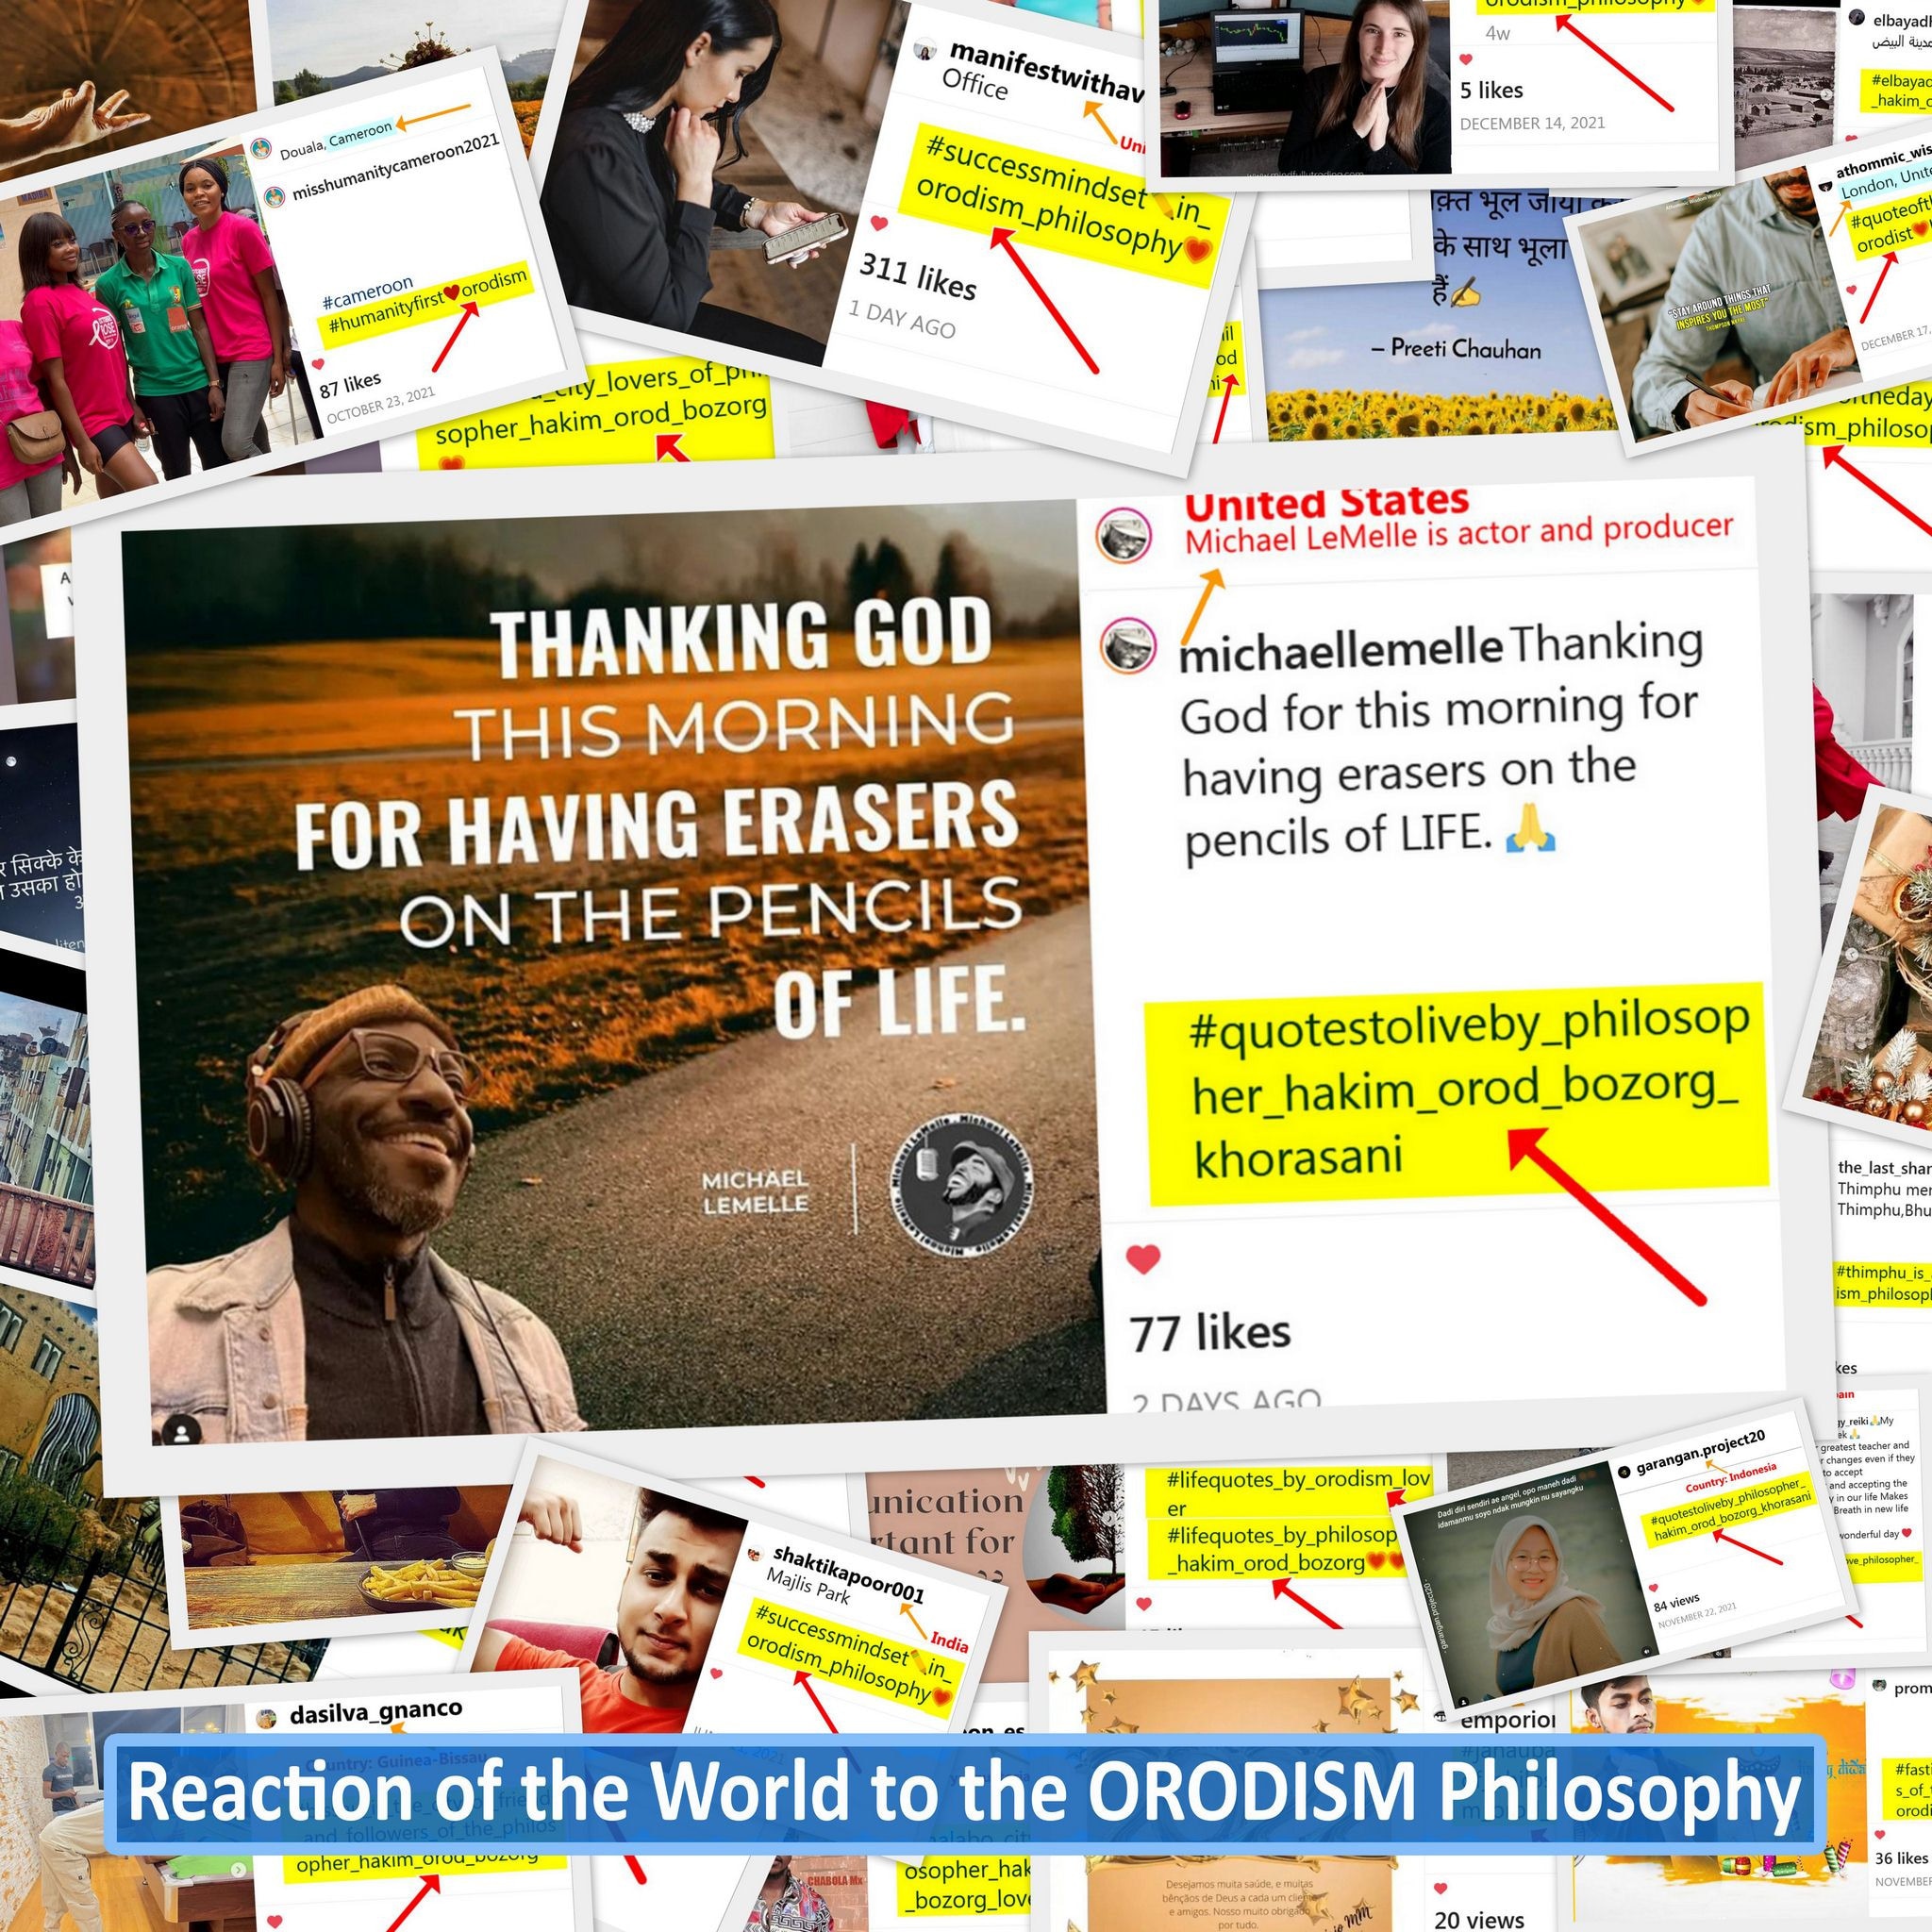 The philosophy of Orodism in United States of America (USA) 10a4fd7826560319056d3be7400d3f22